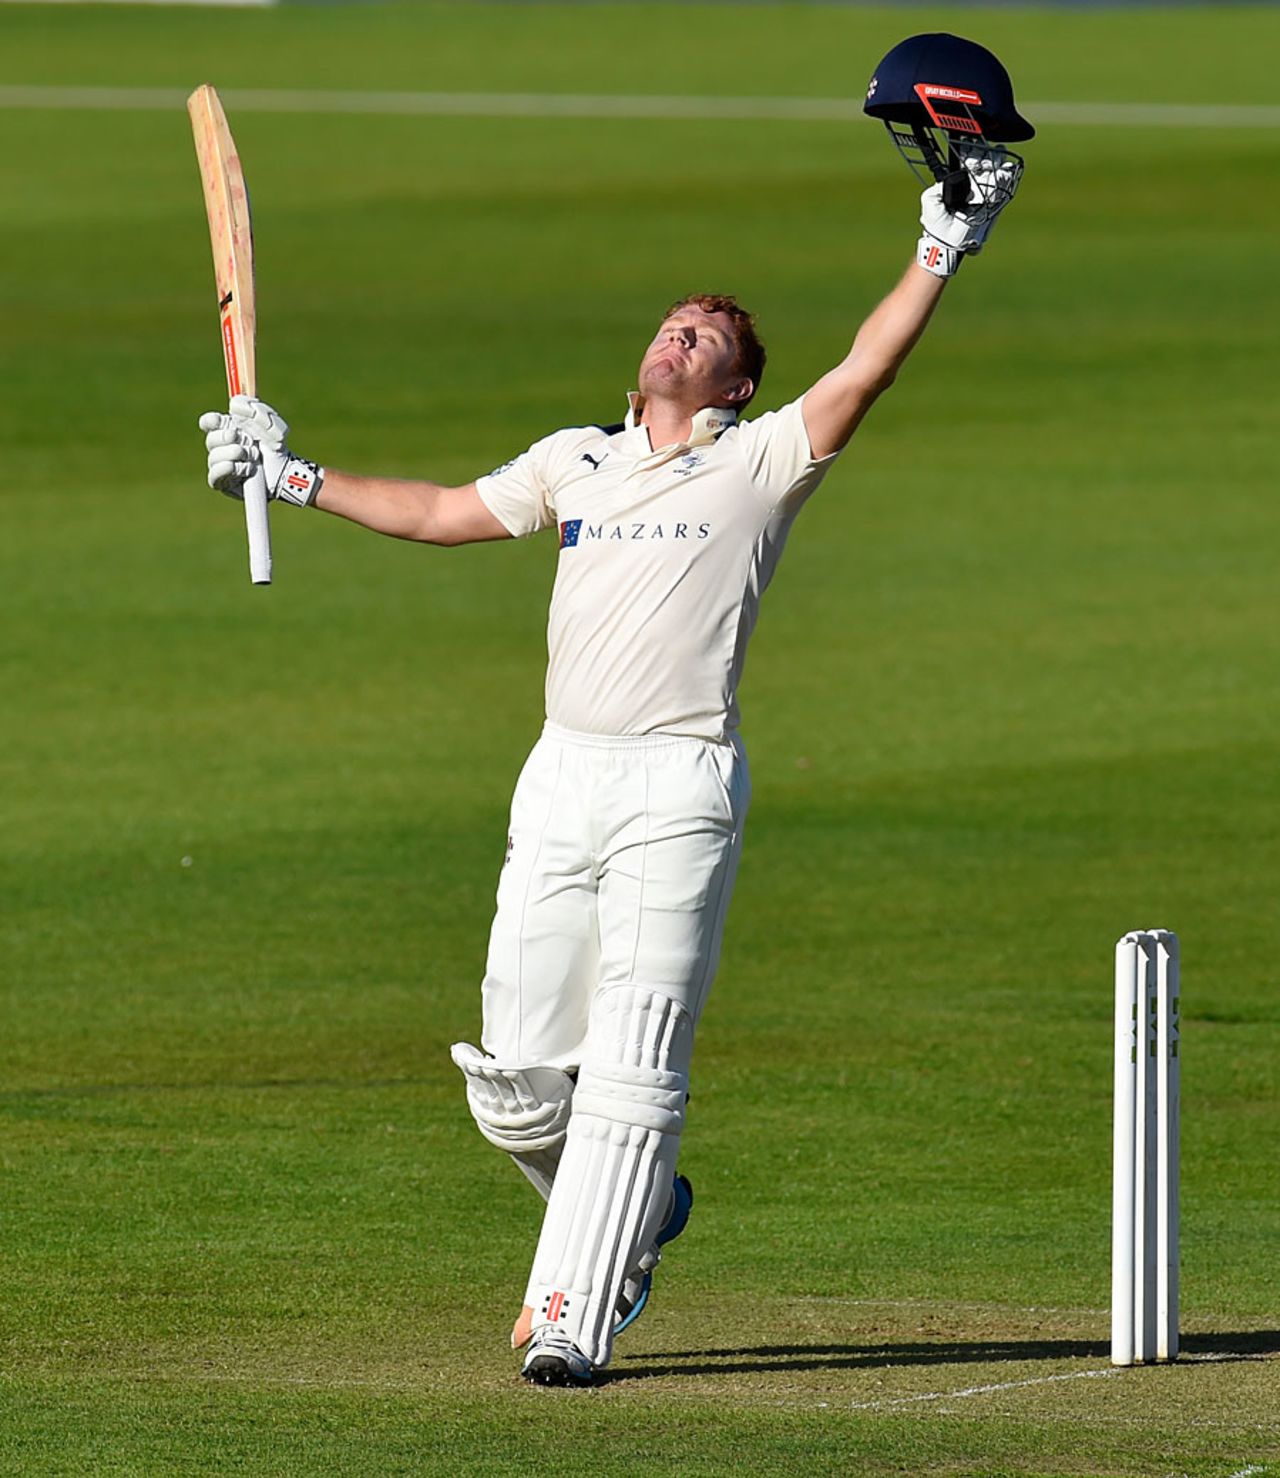 Jonny Bairstow is enjoying playing at Chester-le-Street this season, Durham v Yorkshire, County Championship, Division One, Chester-le-Street, 1st day, June 28, 2015